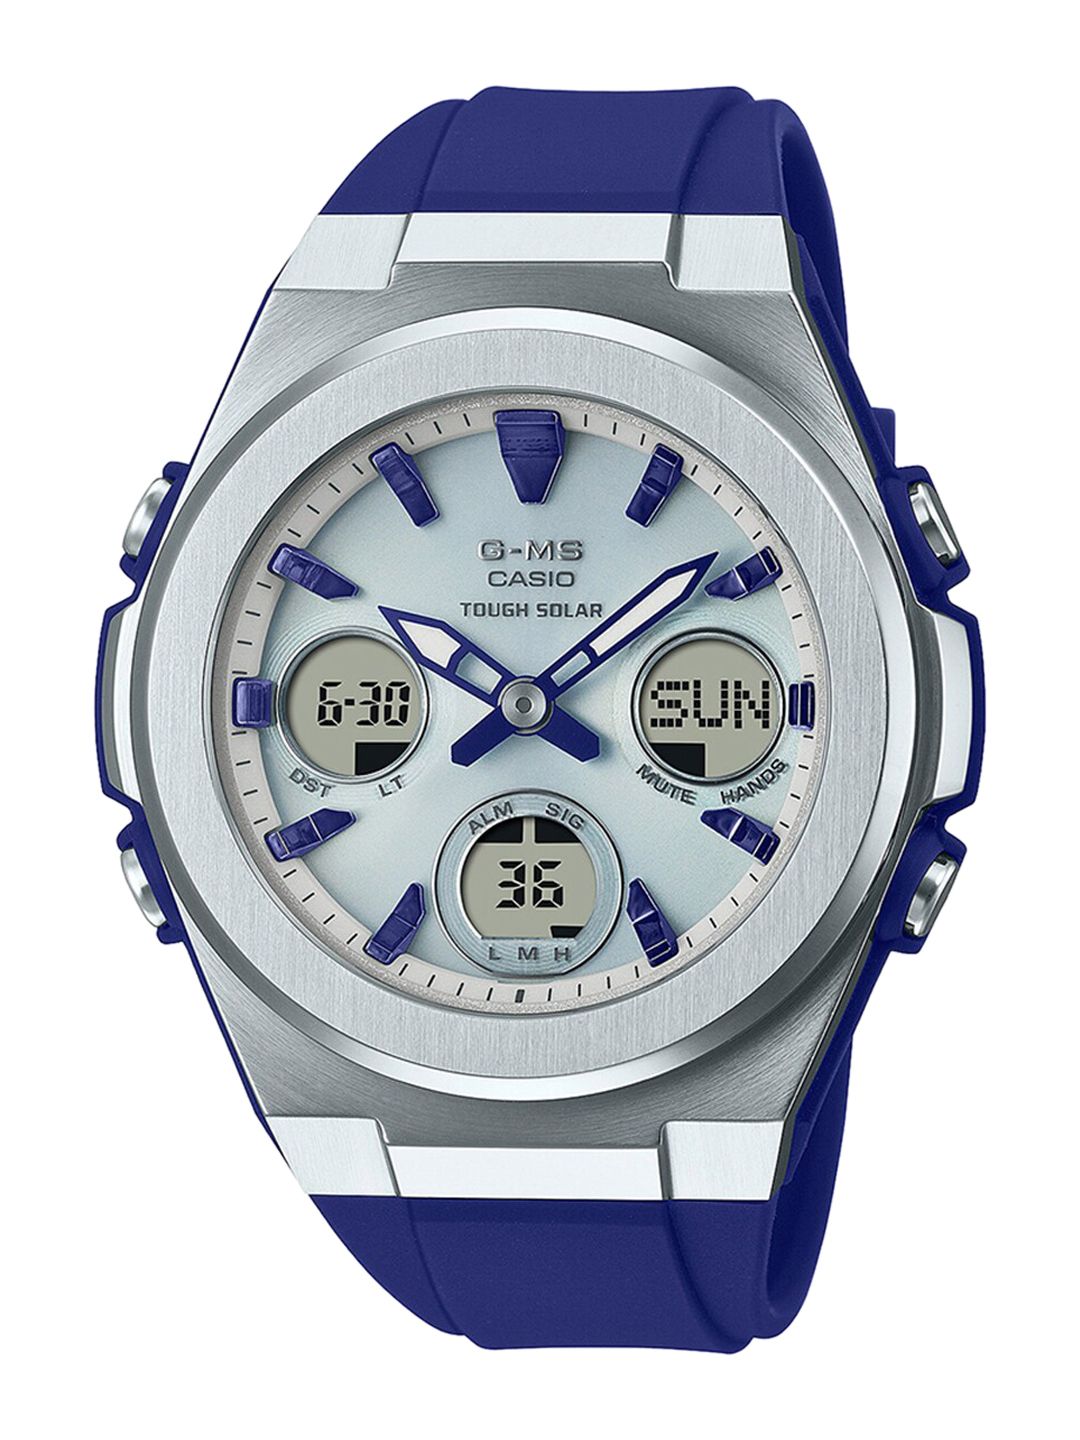 CASIO Women Silver-Toned & Blue Analogue Watch Price in India